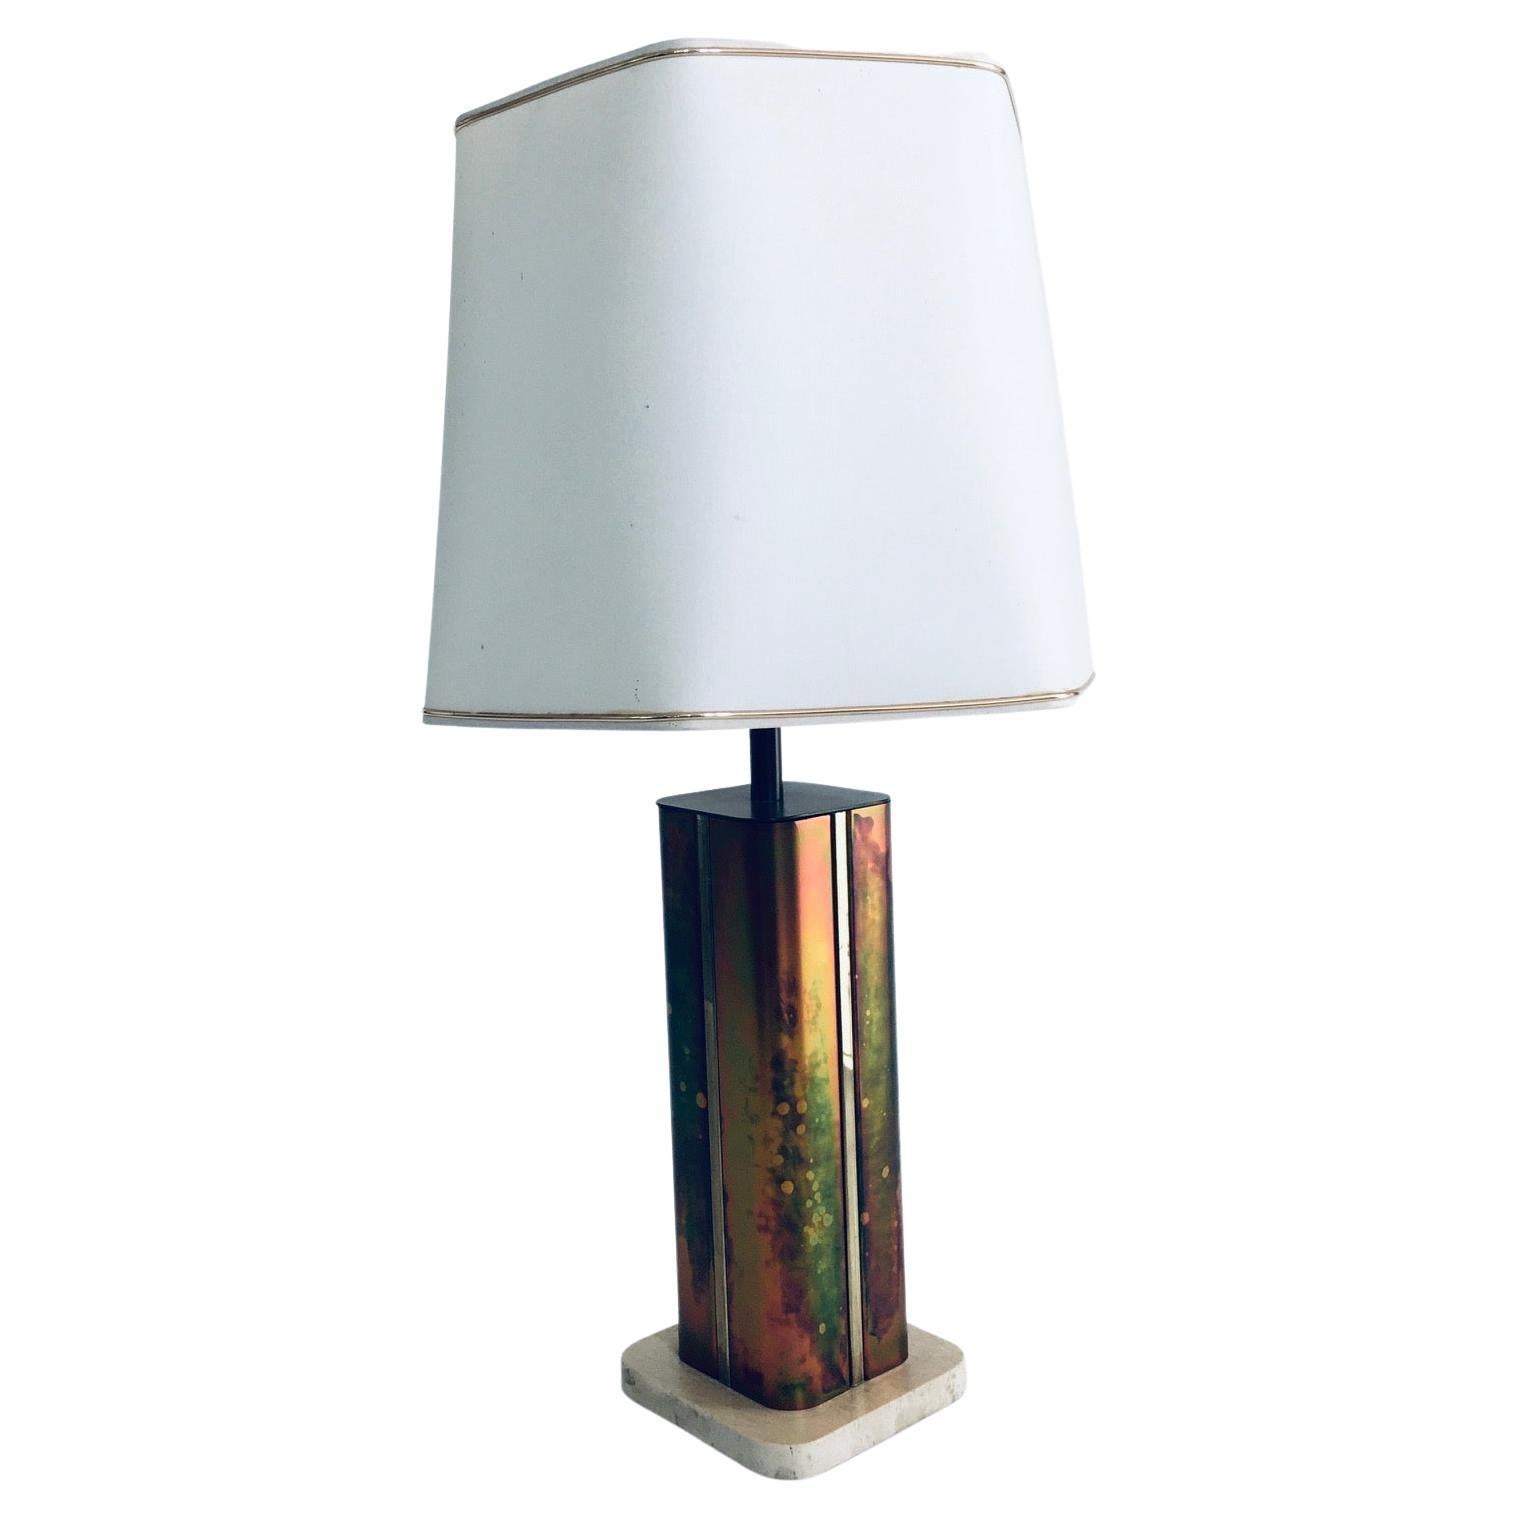 Hollywood Regency Style Design Table Lamp by Fedam, Holland, 1970's For Sale